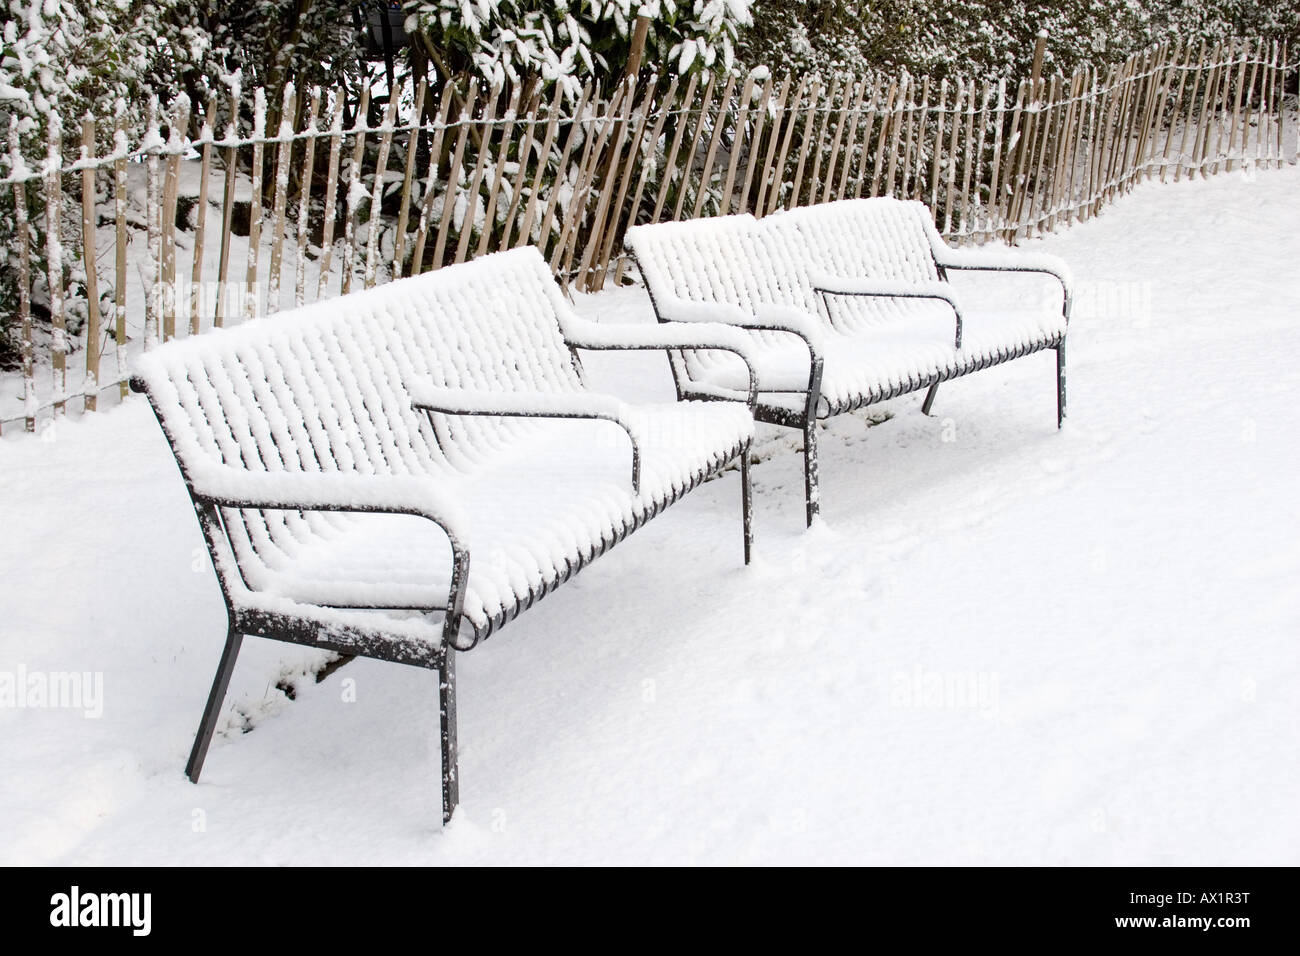 Outdoor park benches in winter, covered in snow Stock Photo